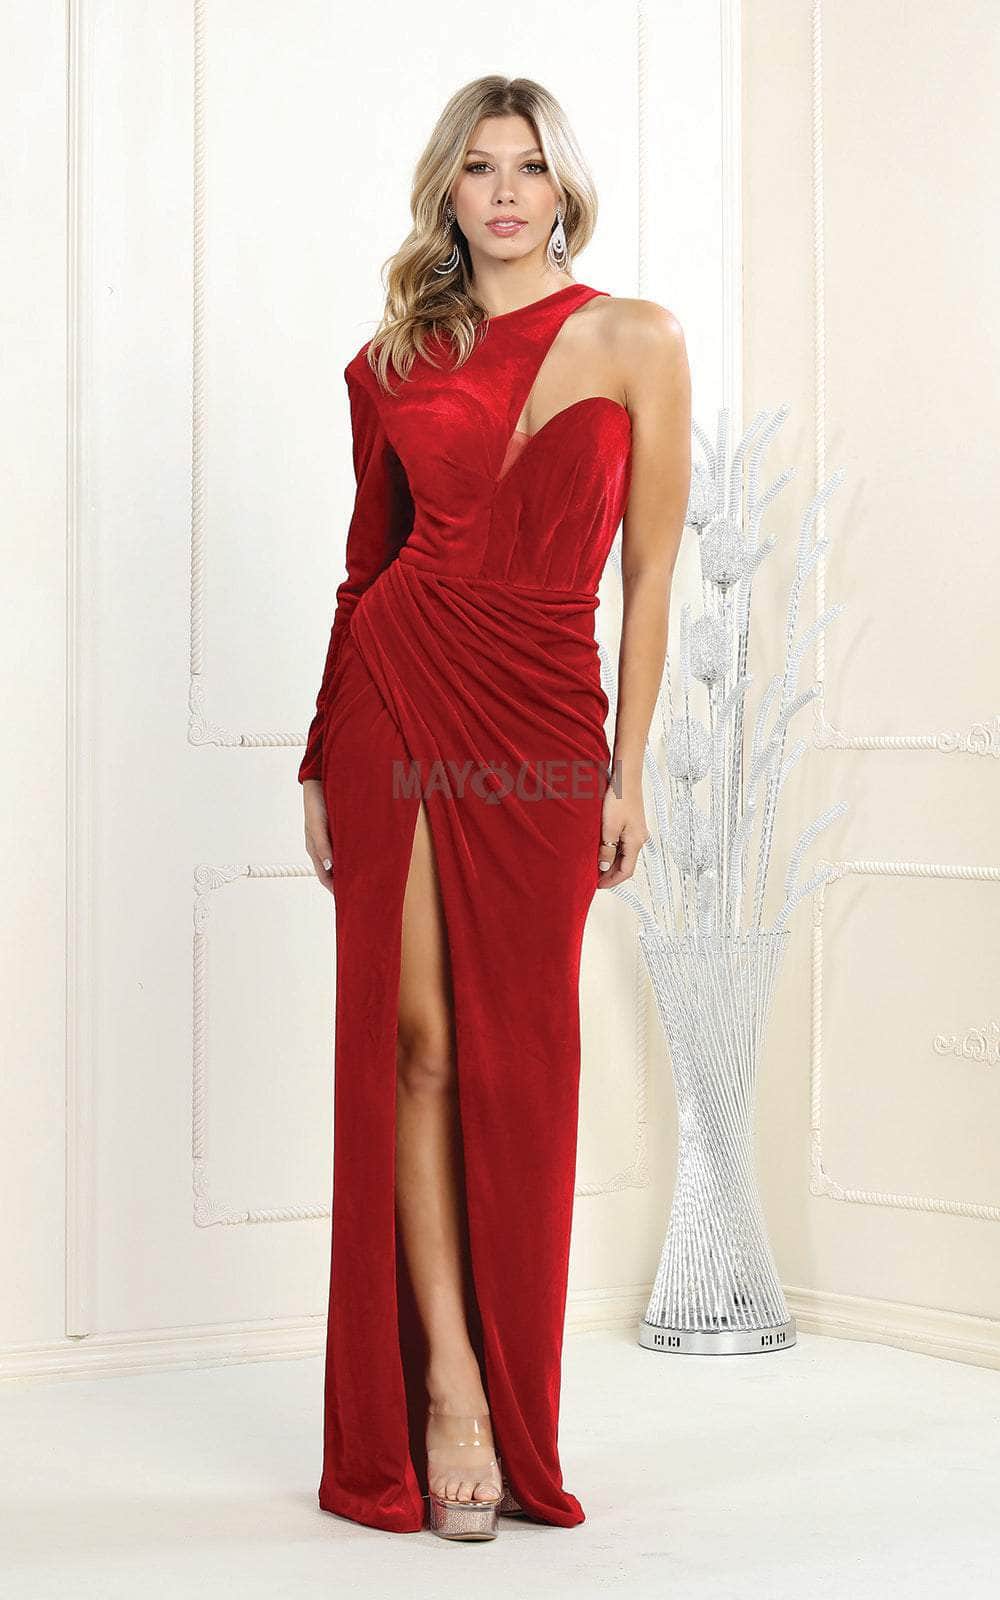 May Queen RQ7999 - One-Shoulder Bateau Neck Dress Special Occasion Dress